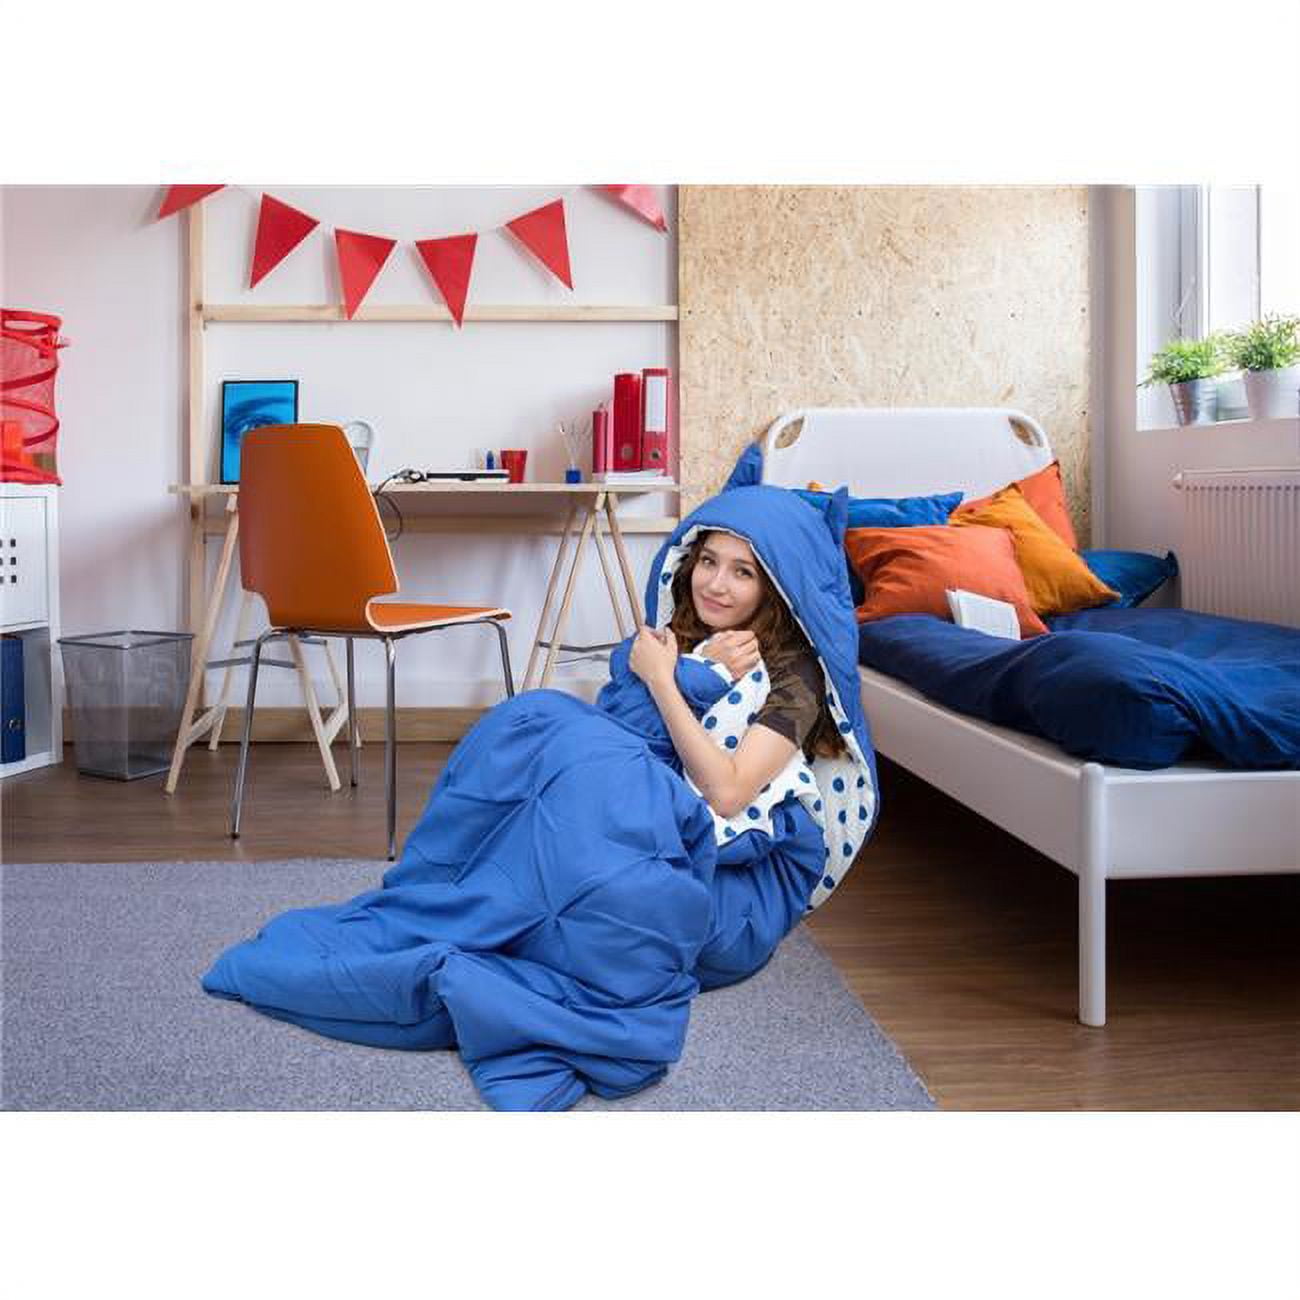 Picture of Chic Home BBG17901-US Jerry Sleeping Bag with Cat Ear Hood Pinch Pleat Design - Blue & White